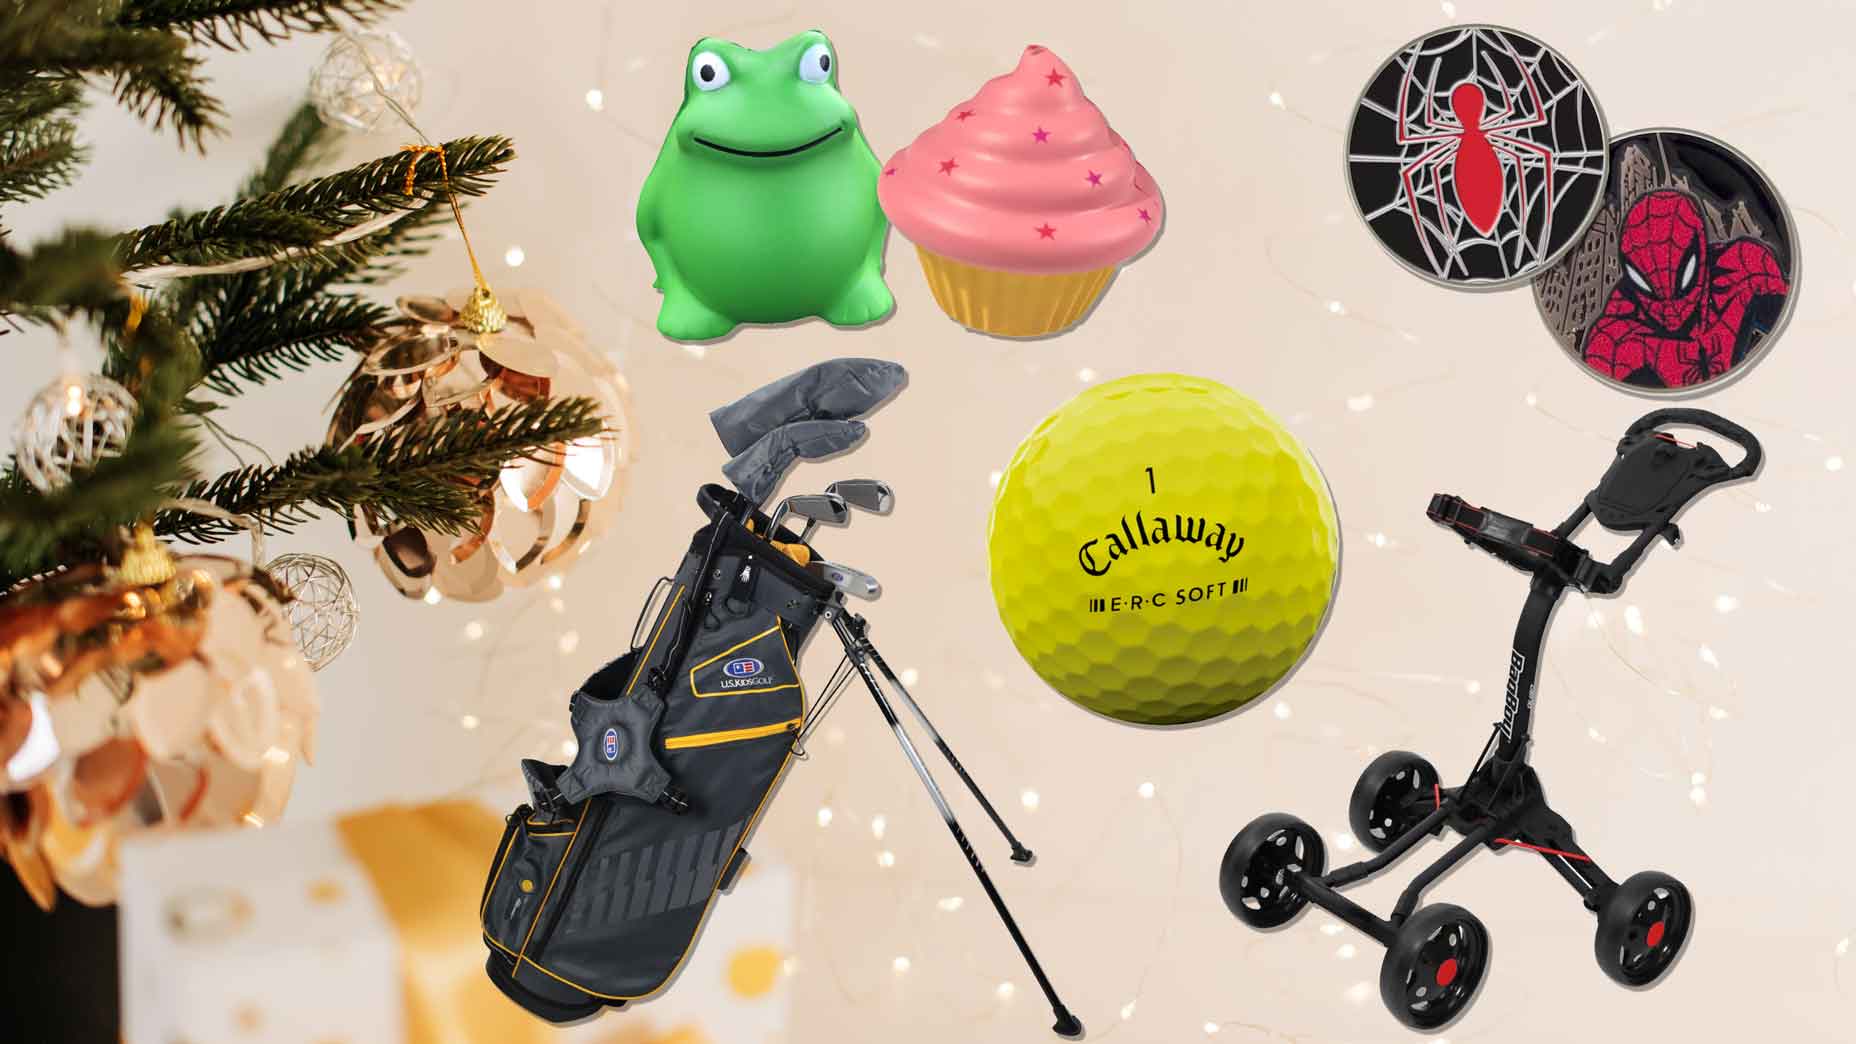 The best gifts for golfers of 2023, Golf Equipment: Clubs, Balls, Bags